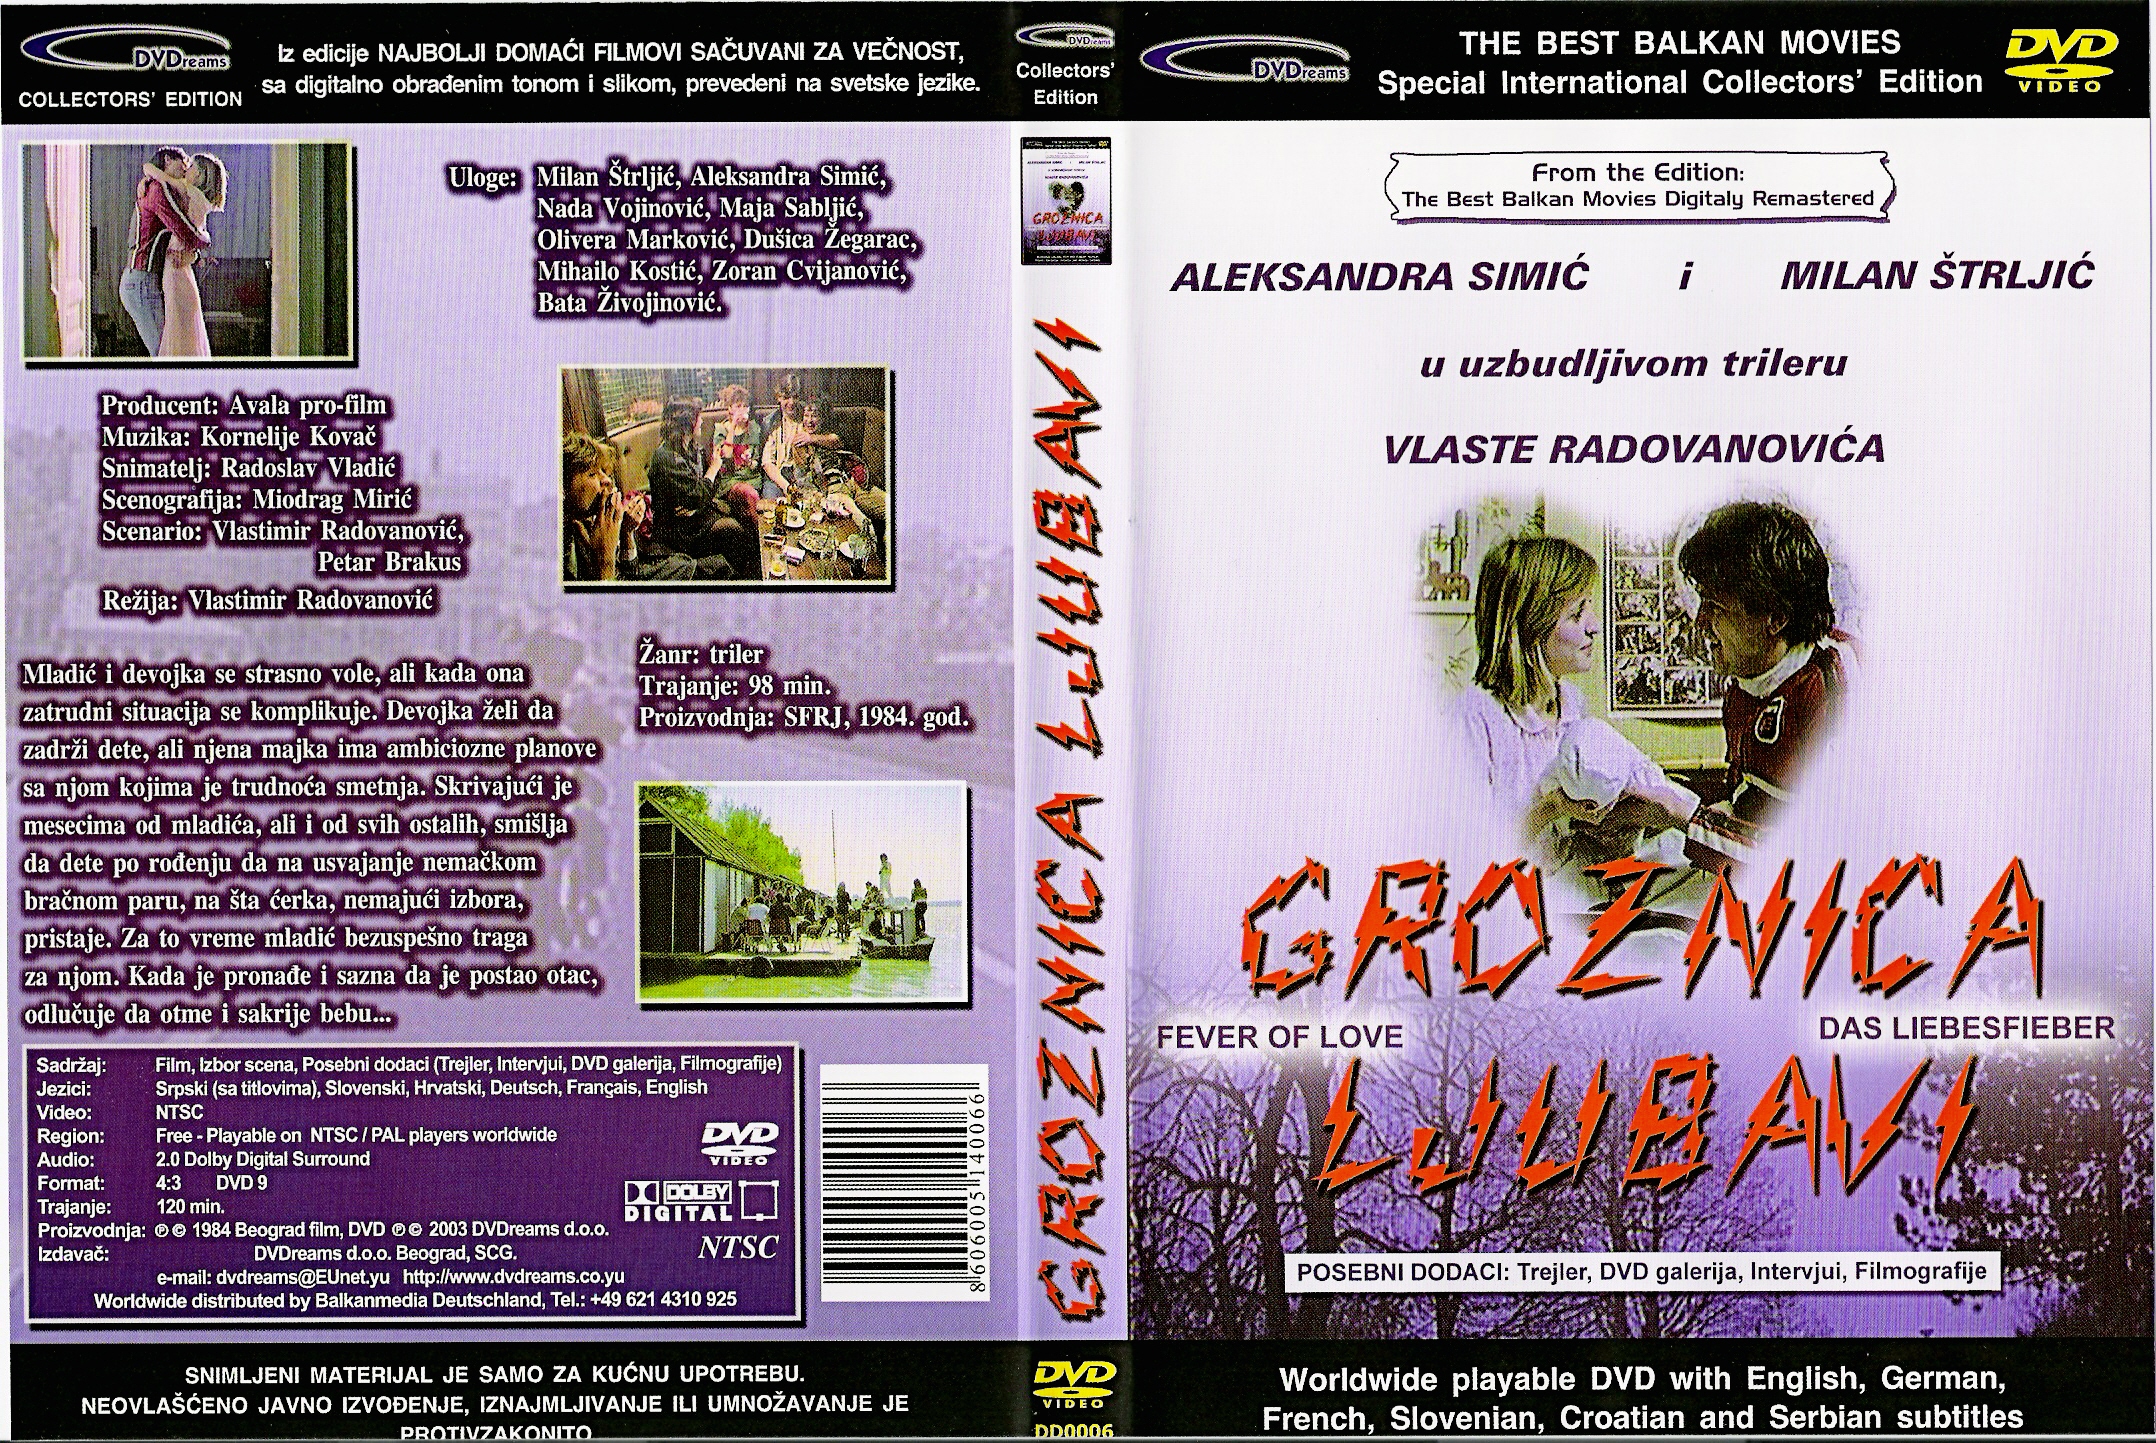 Click to view full size image -  DVD Cover - G - DVD - GROZNICA LJUBAVI - DVD - GROZNICA LJUBAVI.jpg